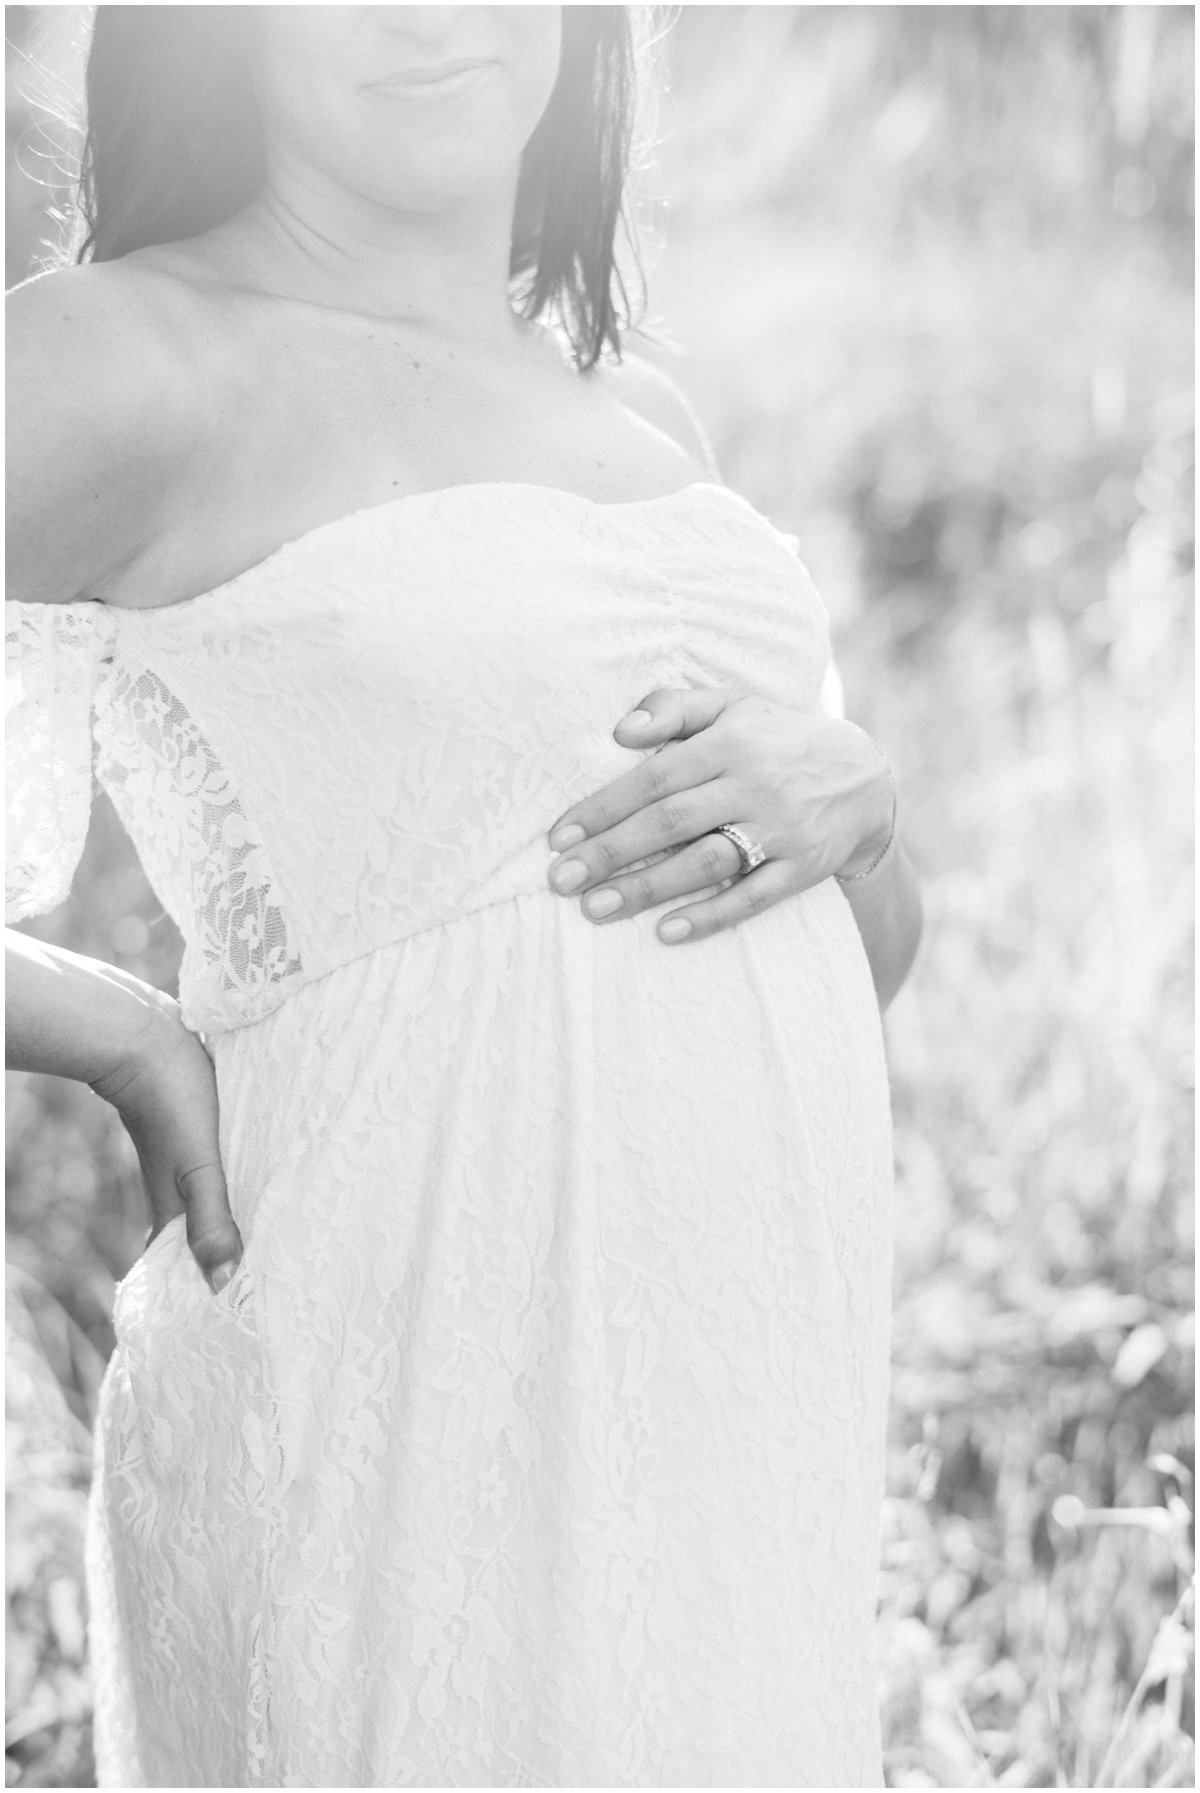 Woman wearing sleeveless white dress and cradling pregnant belly during maternity session | NKB Photo